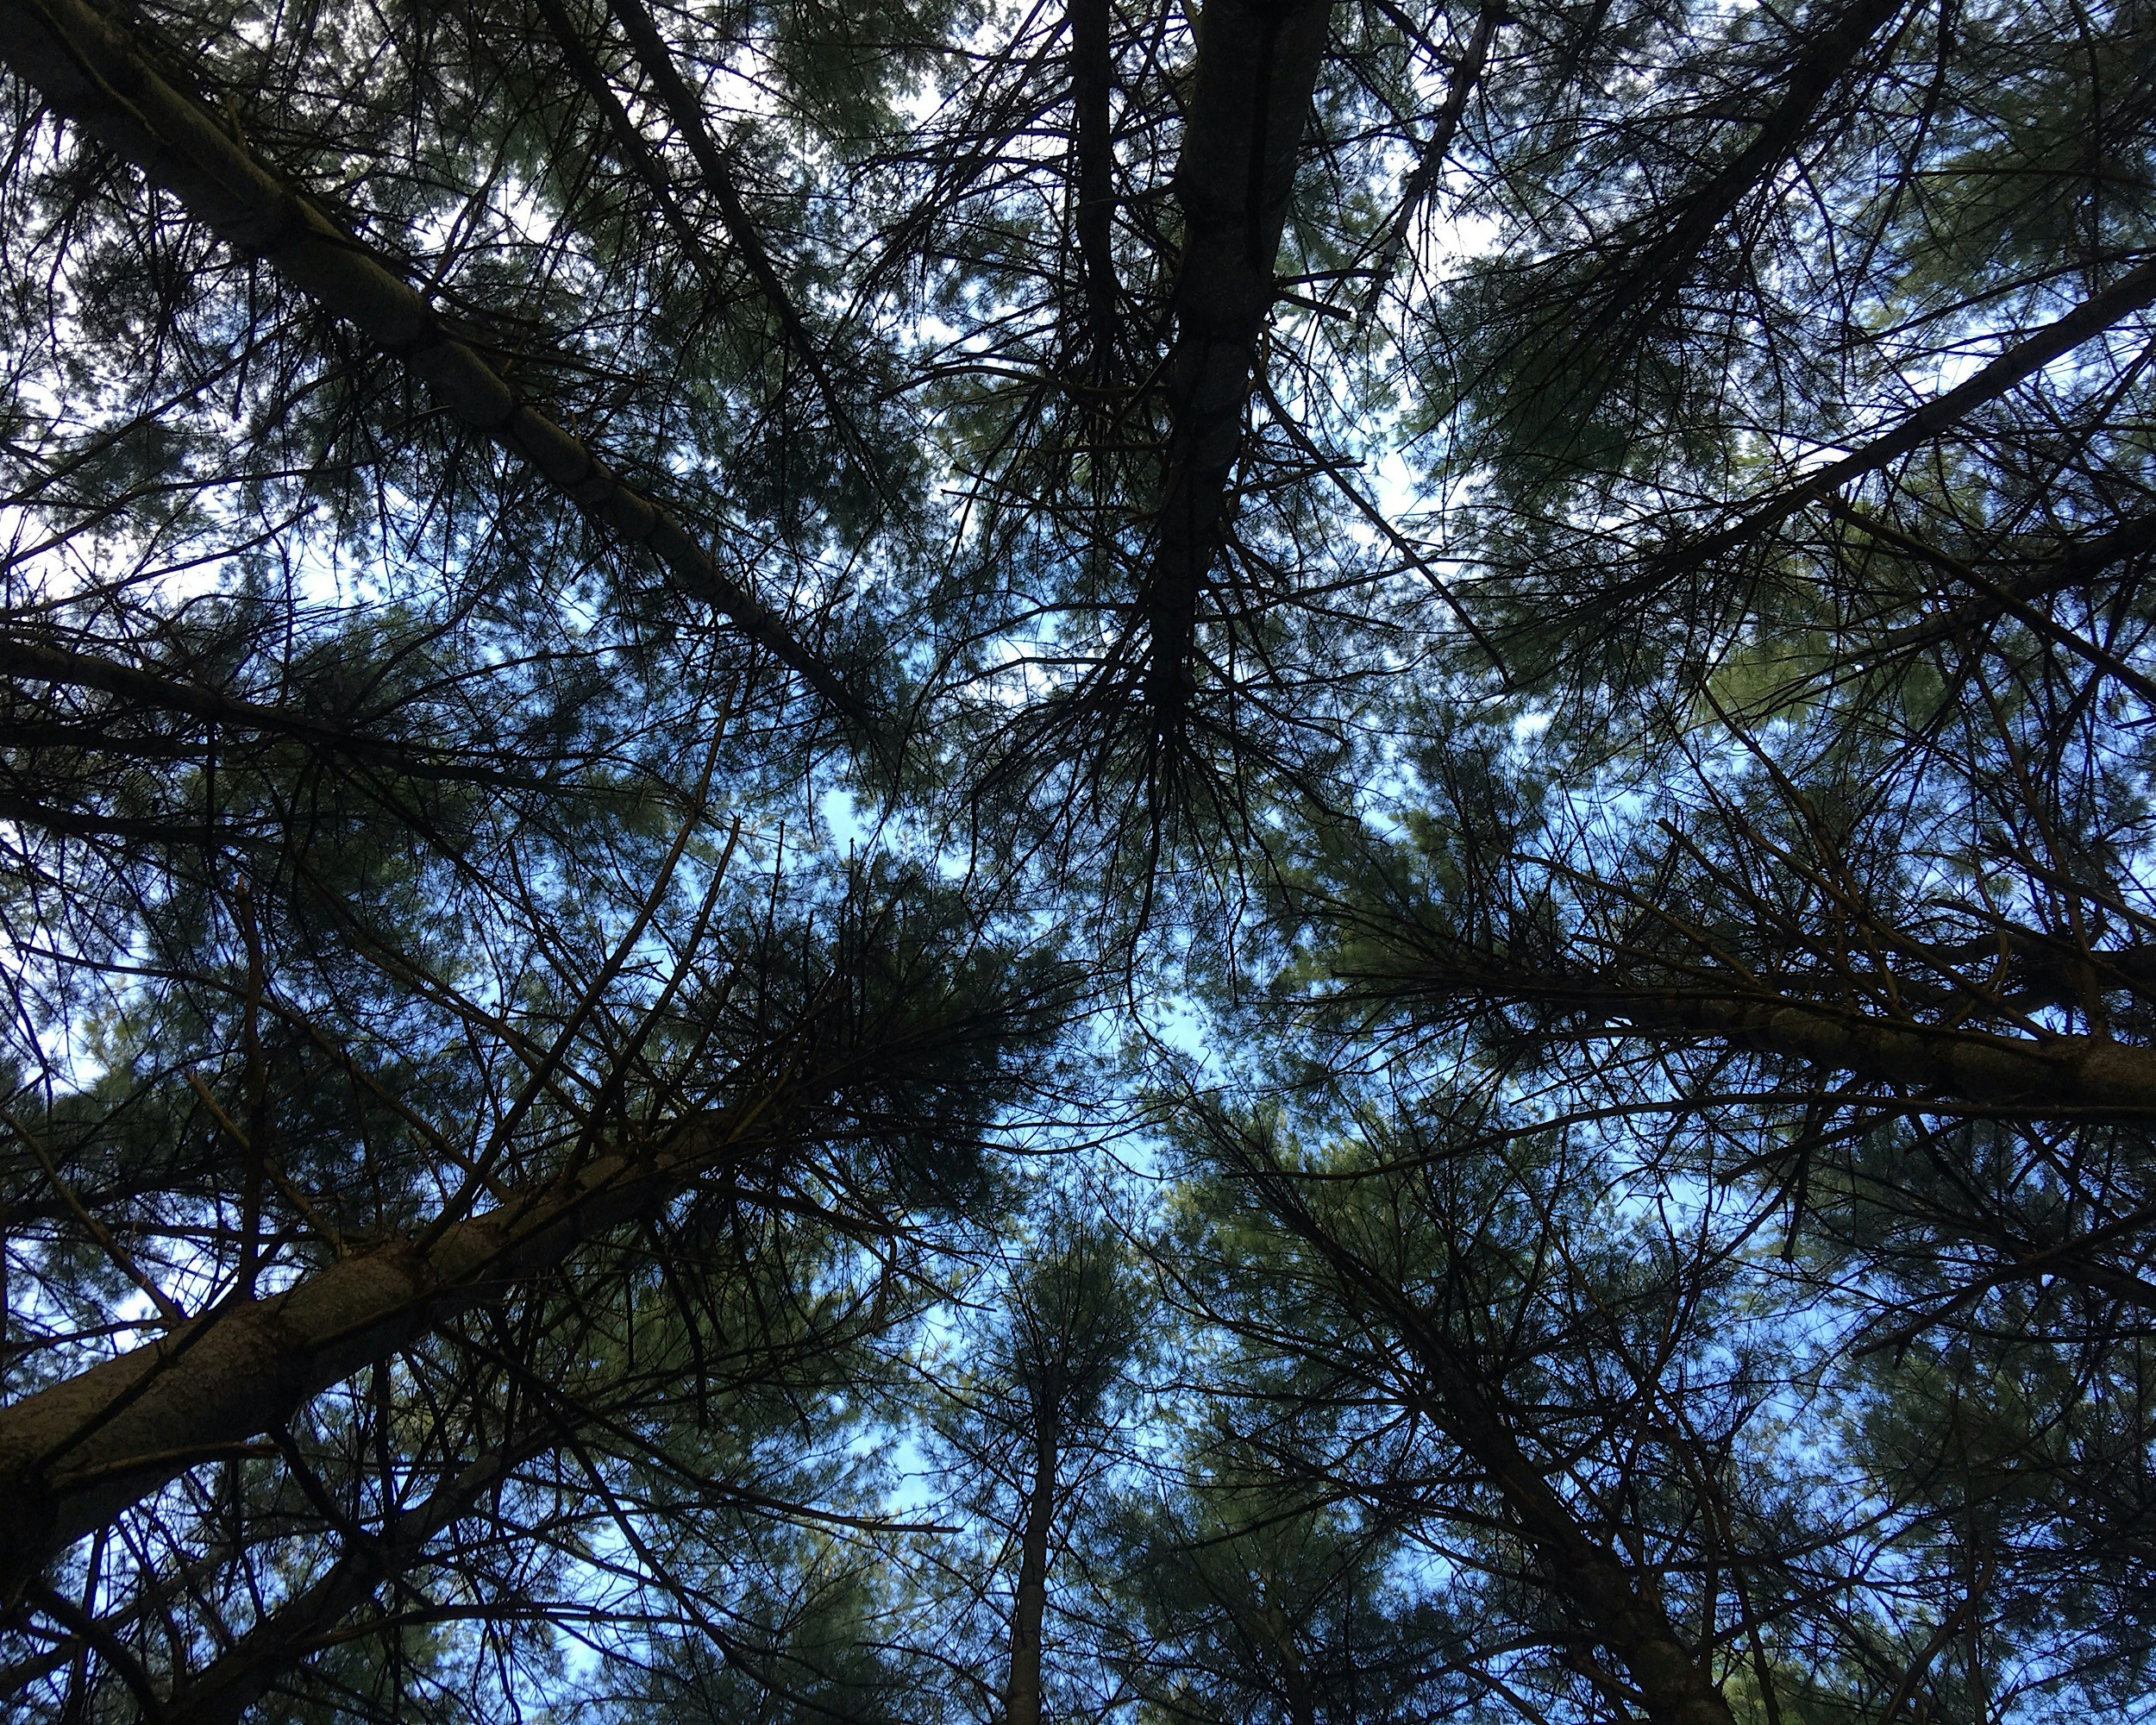 At an abandoned tree farm where all the pines are planted in even rows and it makes you dizzy to look up. Near the Hoosier Valley Railroad Museum.